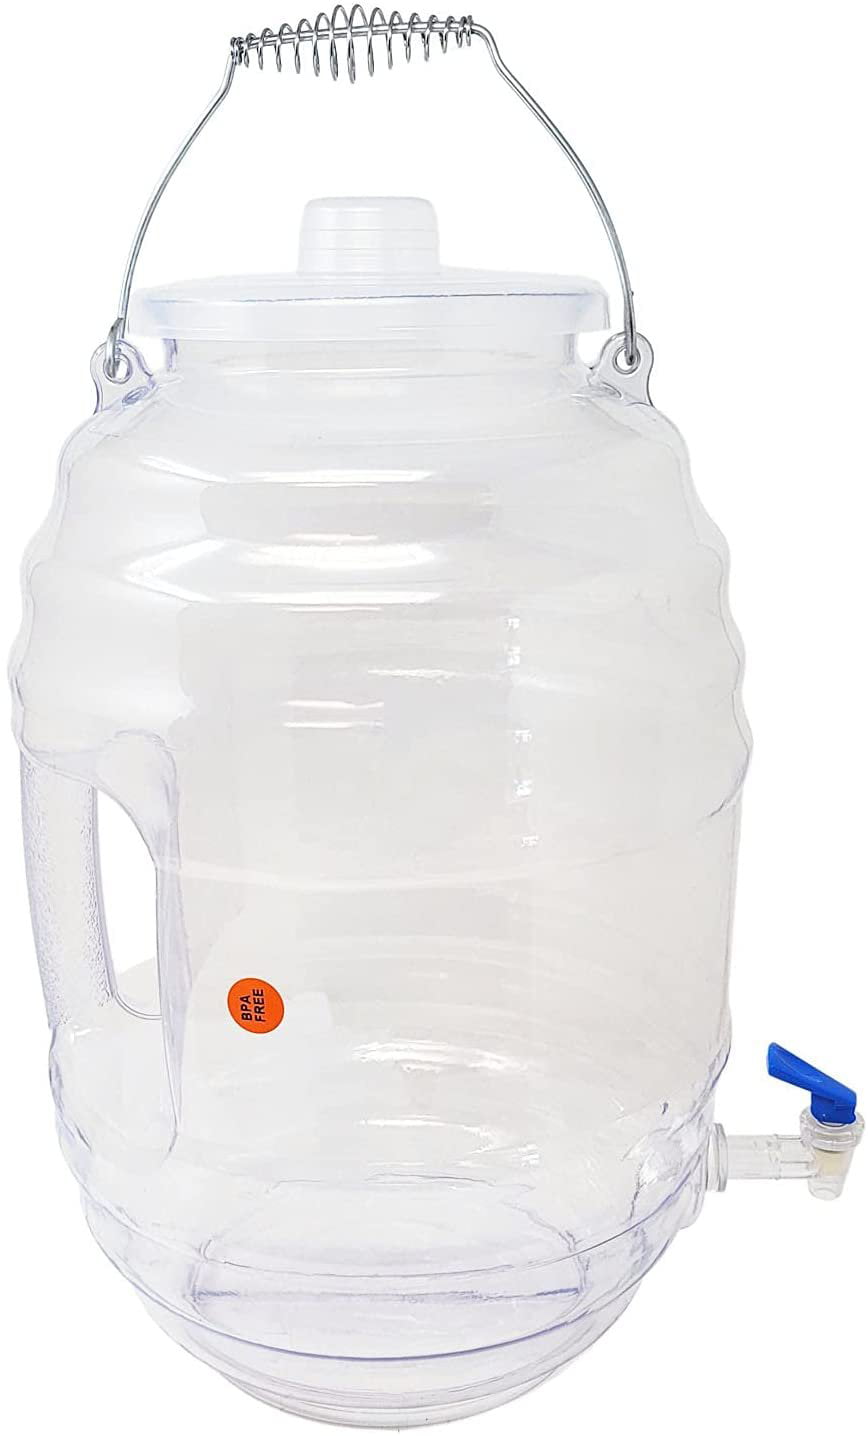 Champs 5 Gallon Jug with Lid and Spout - Aguas Frescas Vitrolero Plastic Water Container - 5 Gallon Drink Dispenser - Large Beve